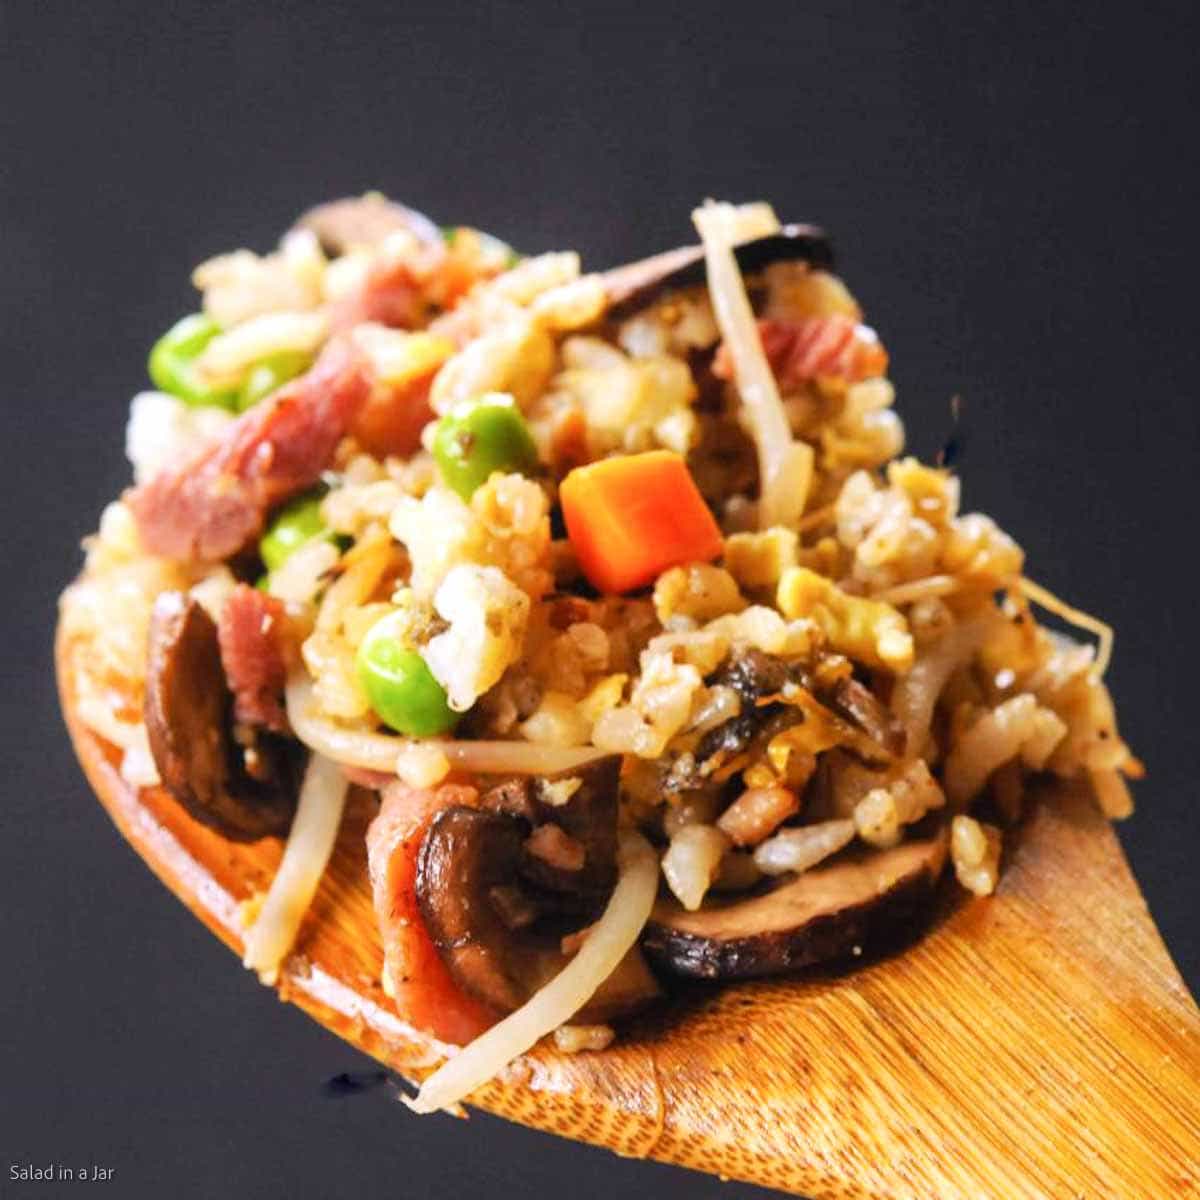 Fried rice on a wooden spoon.